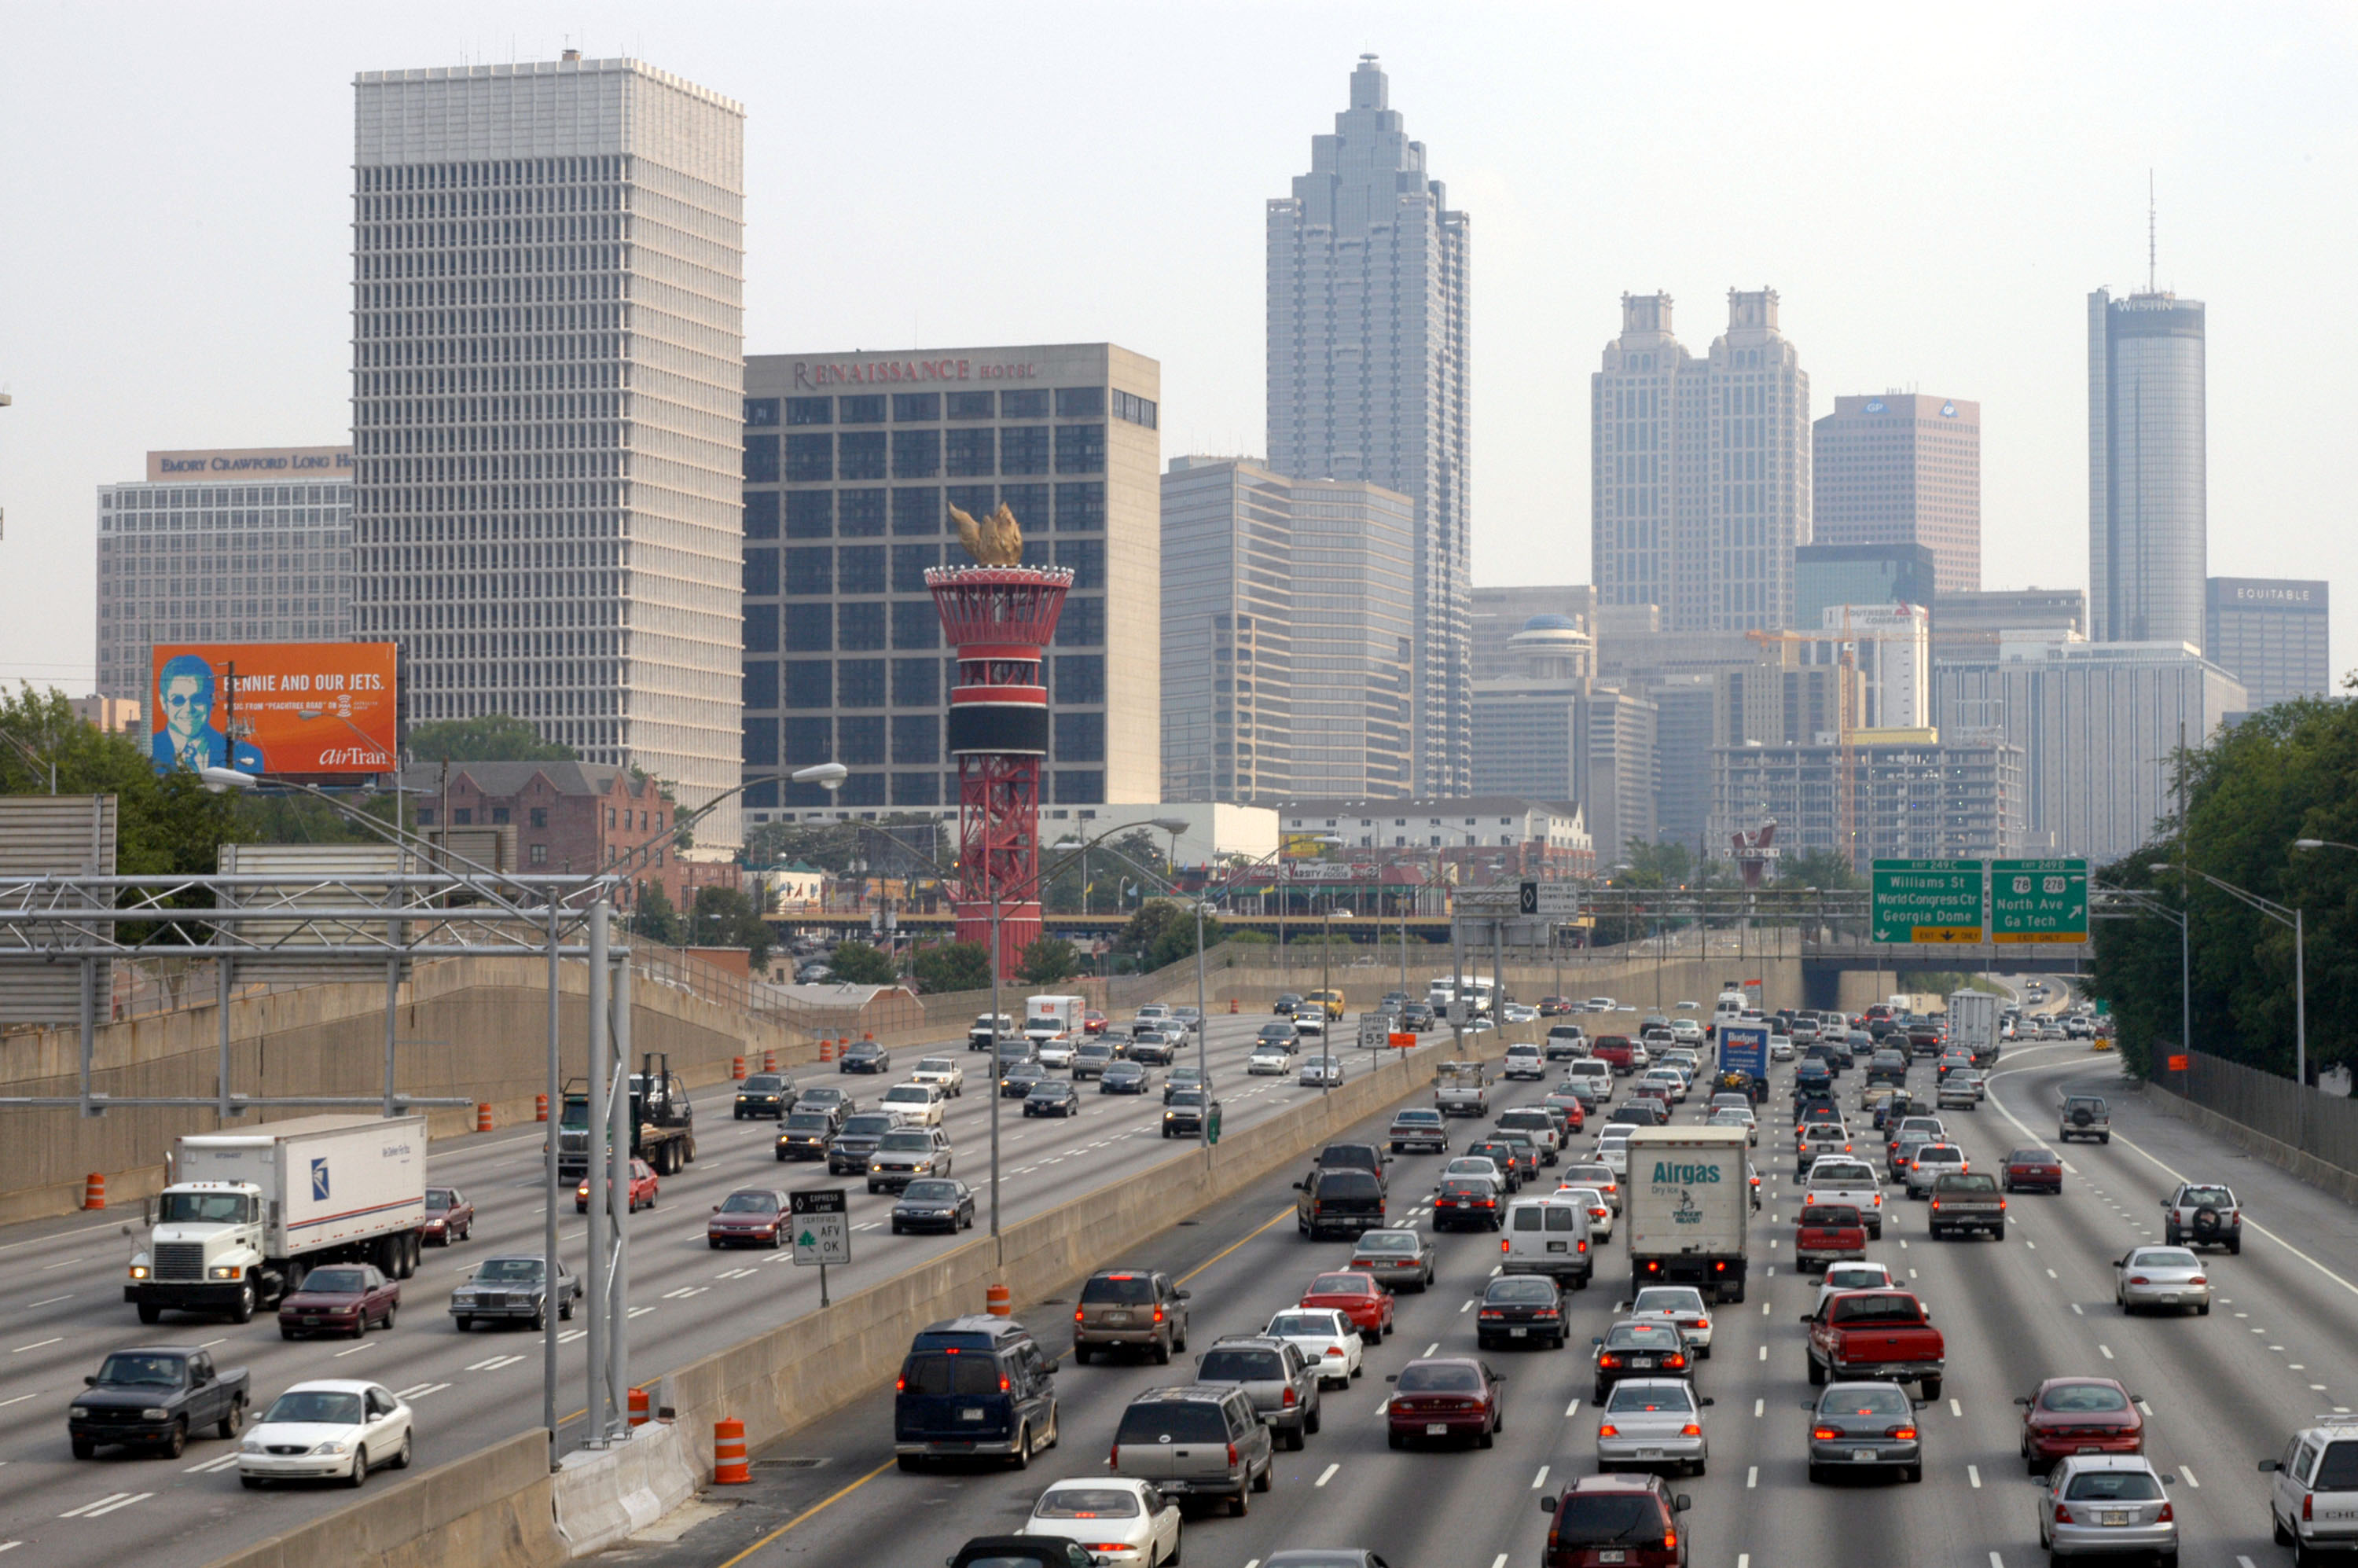 A picture of atlanta traffic, with cars in the foreground and buildings behind.